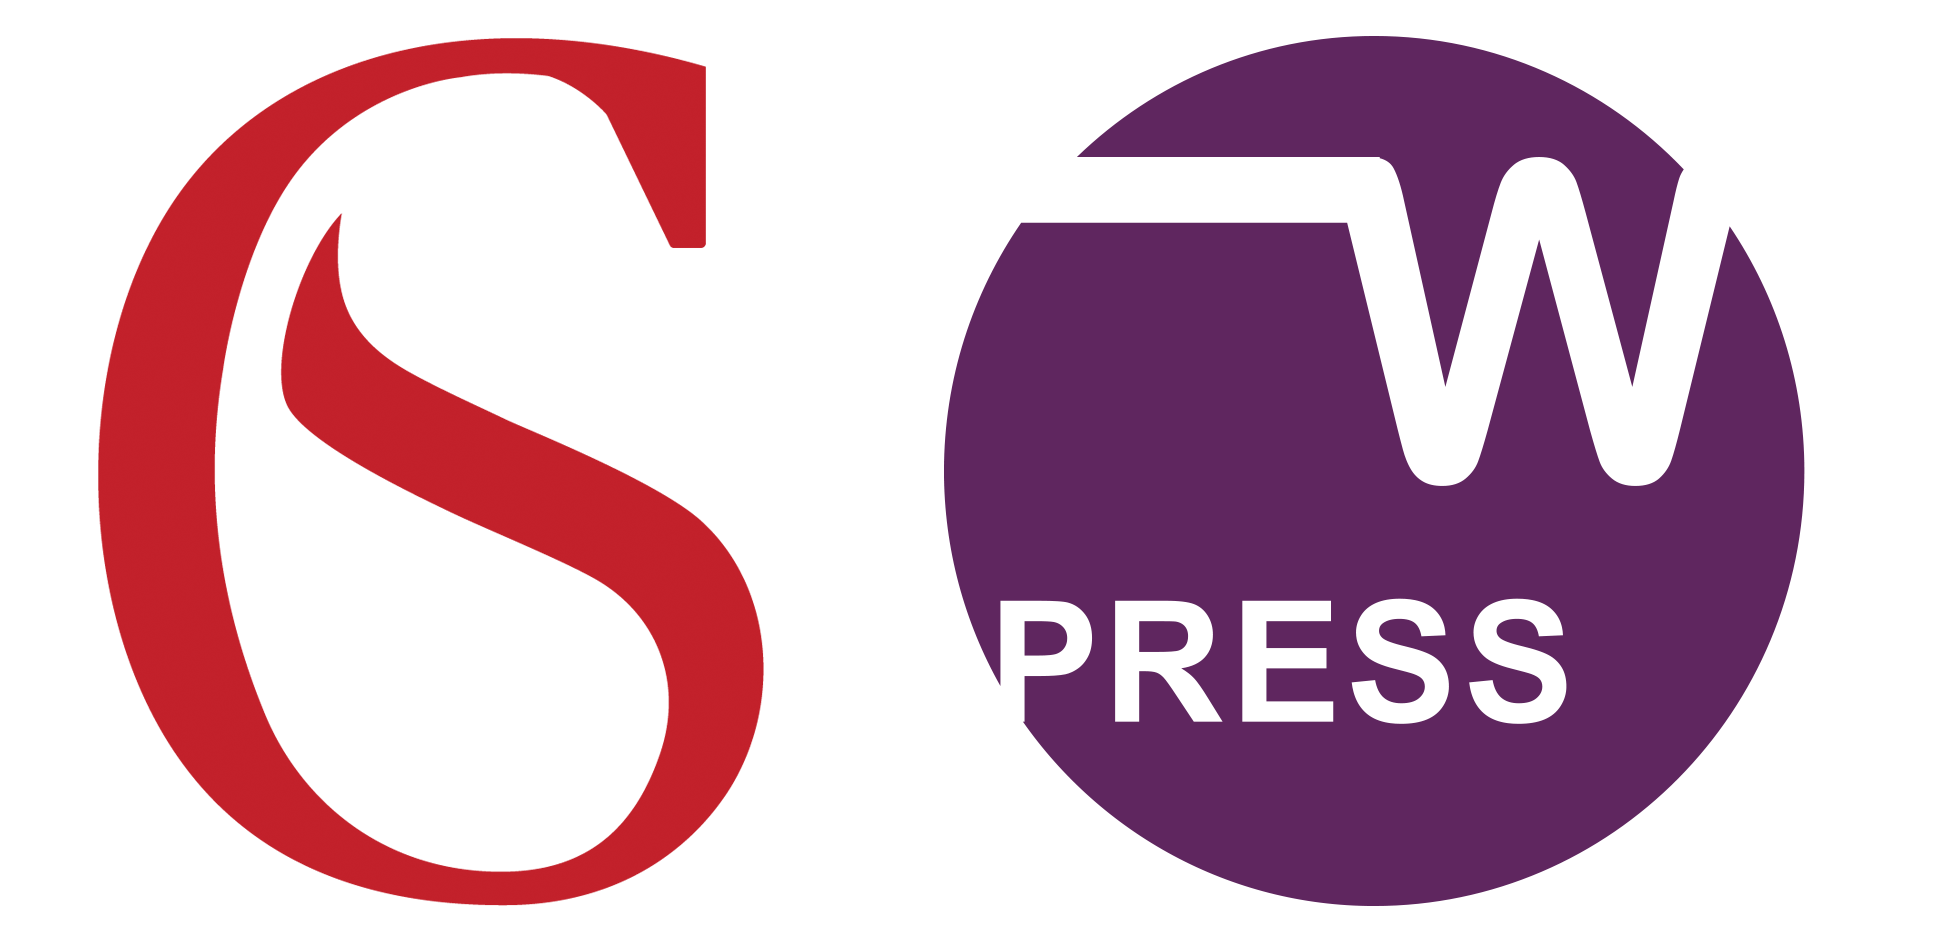 Canadian scholars and womens press logo